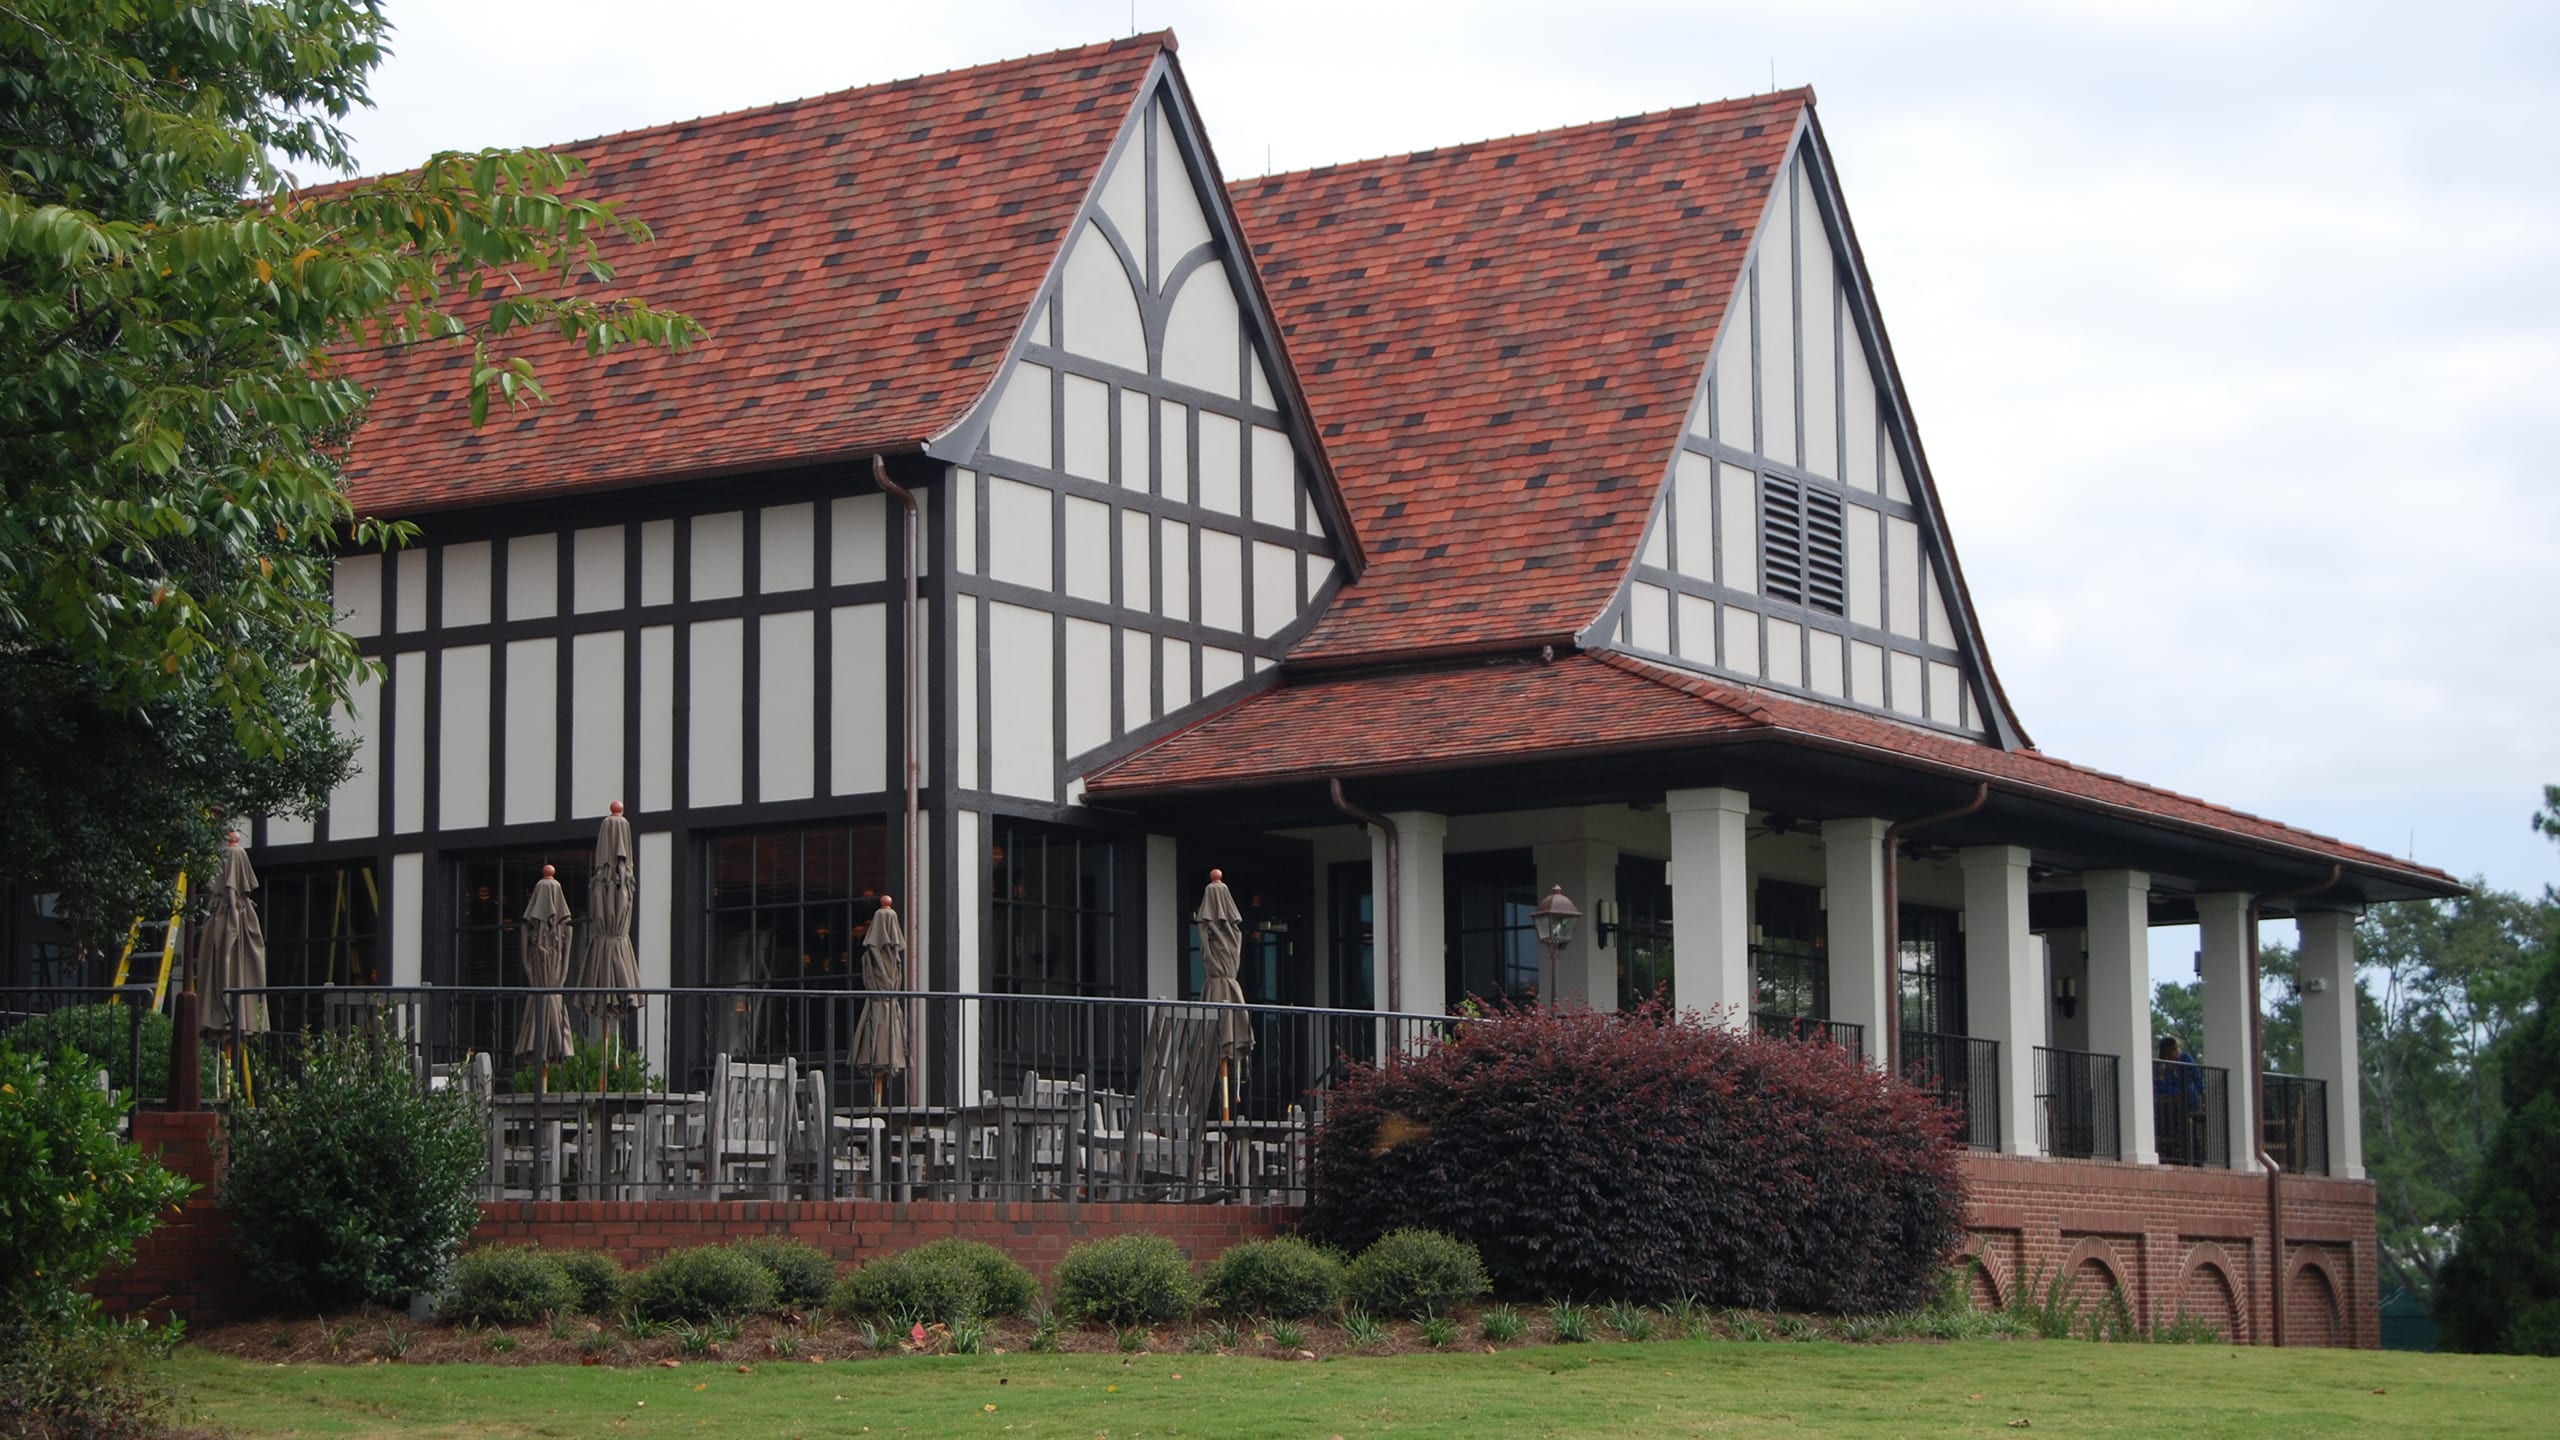 East Lake Golf Club Featuring Historic Custom Clay Shingle Tile from Ludowici